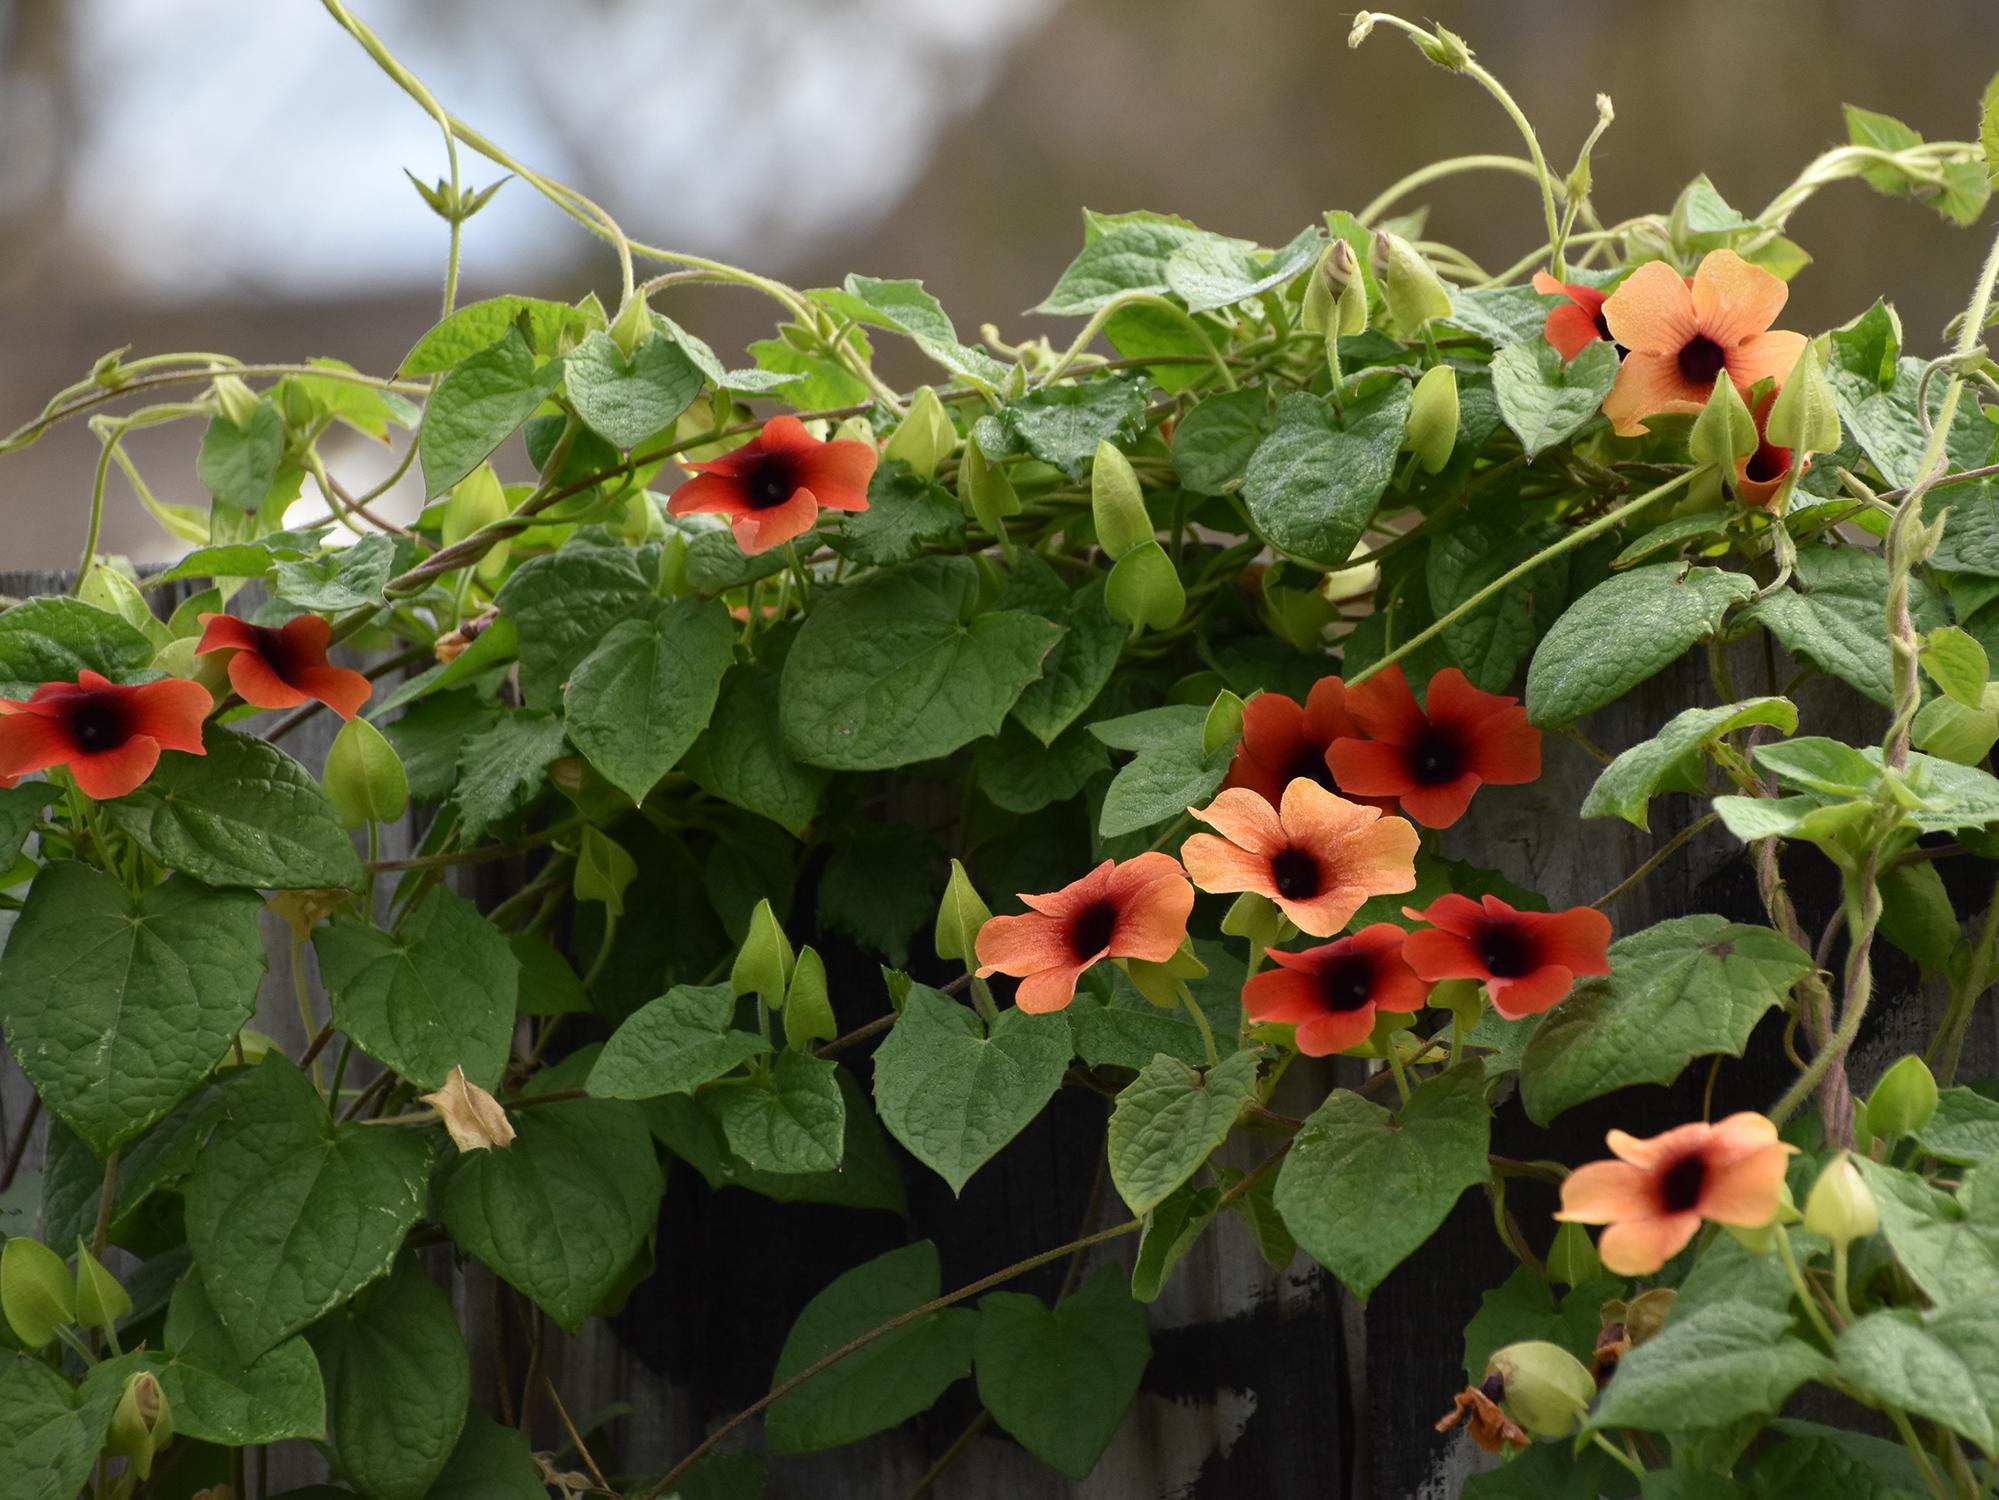 Orange vine flowers resembling black-eyed Susans straddle the top of a wooden gray fence.